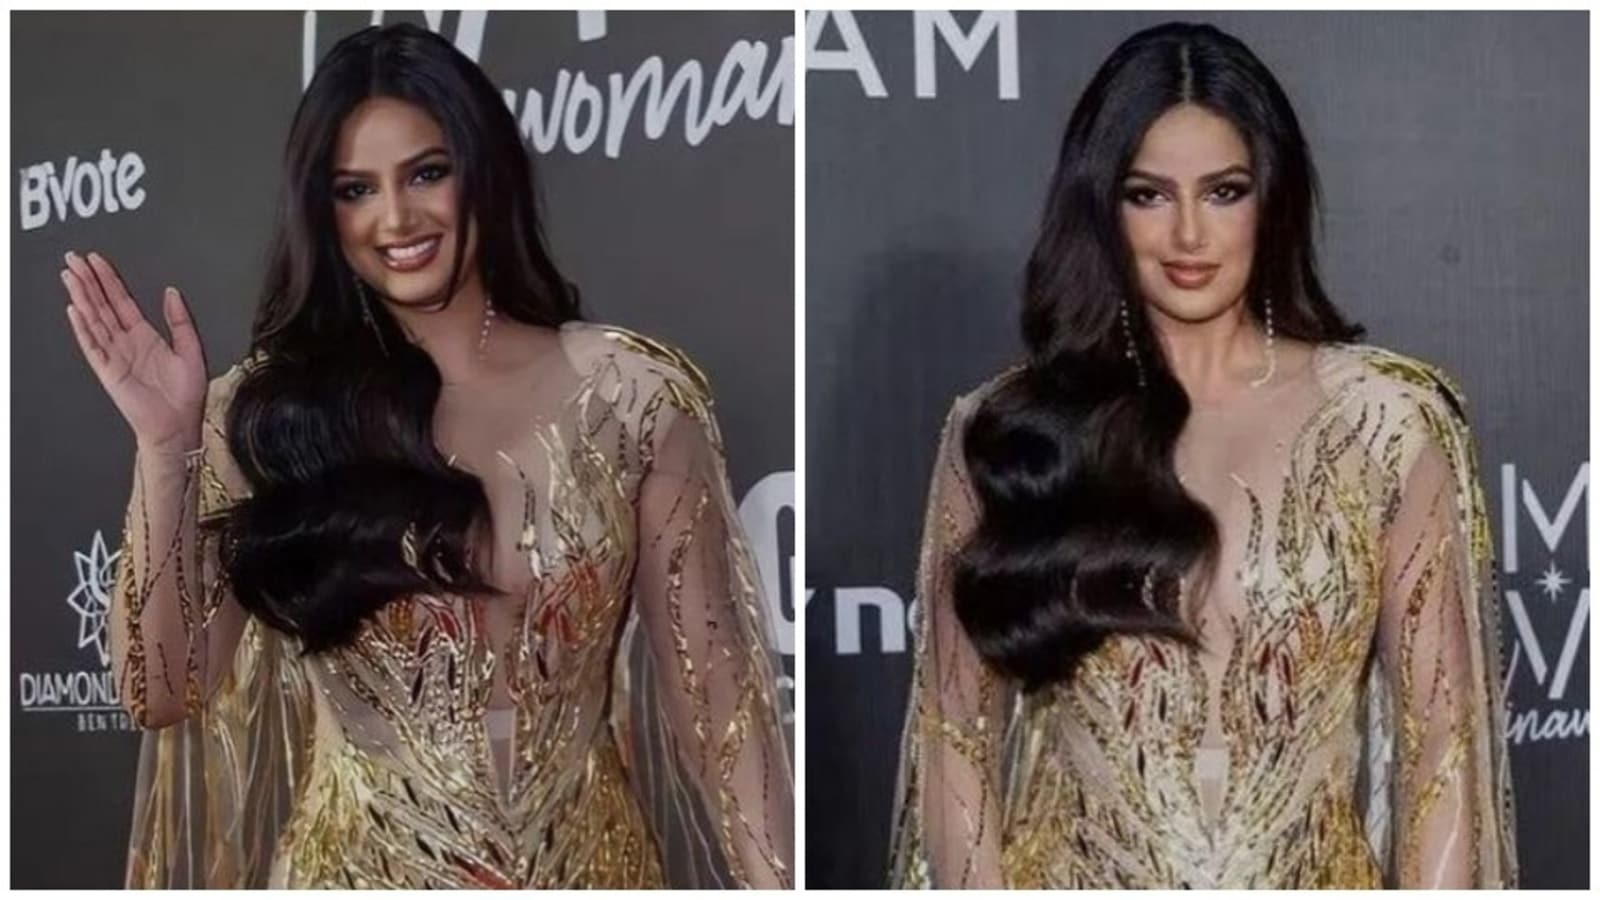 Harnaaz Sandhu is a vision in nude sequin gown for Miss Universe Vietnam red carpet, sends love and respect to Vietnam Fashion Trends photo